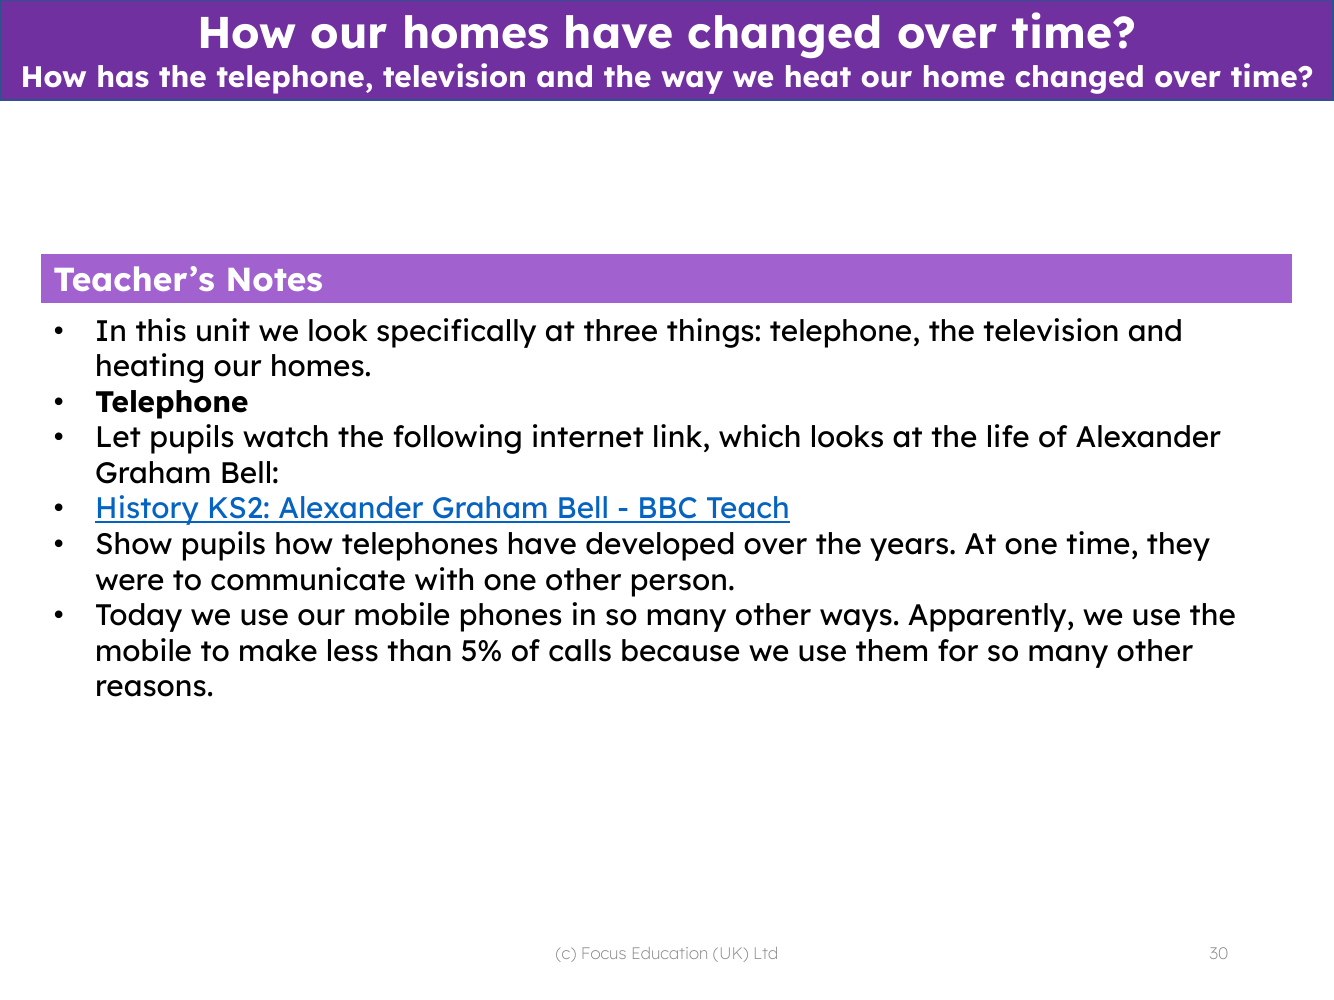 How has the telephone, television and the way we hear our home changed over time? - Teacher notes